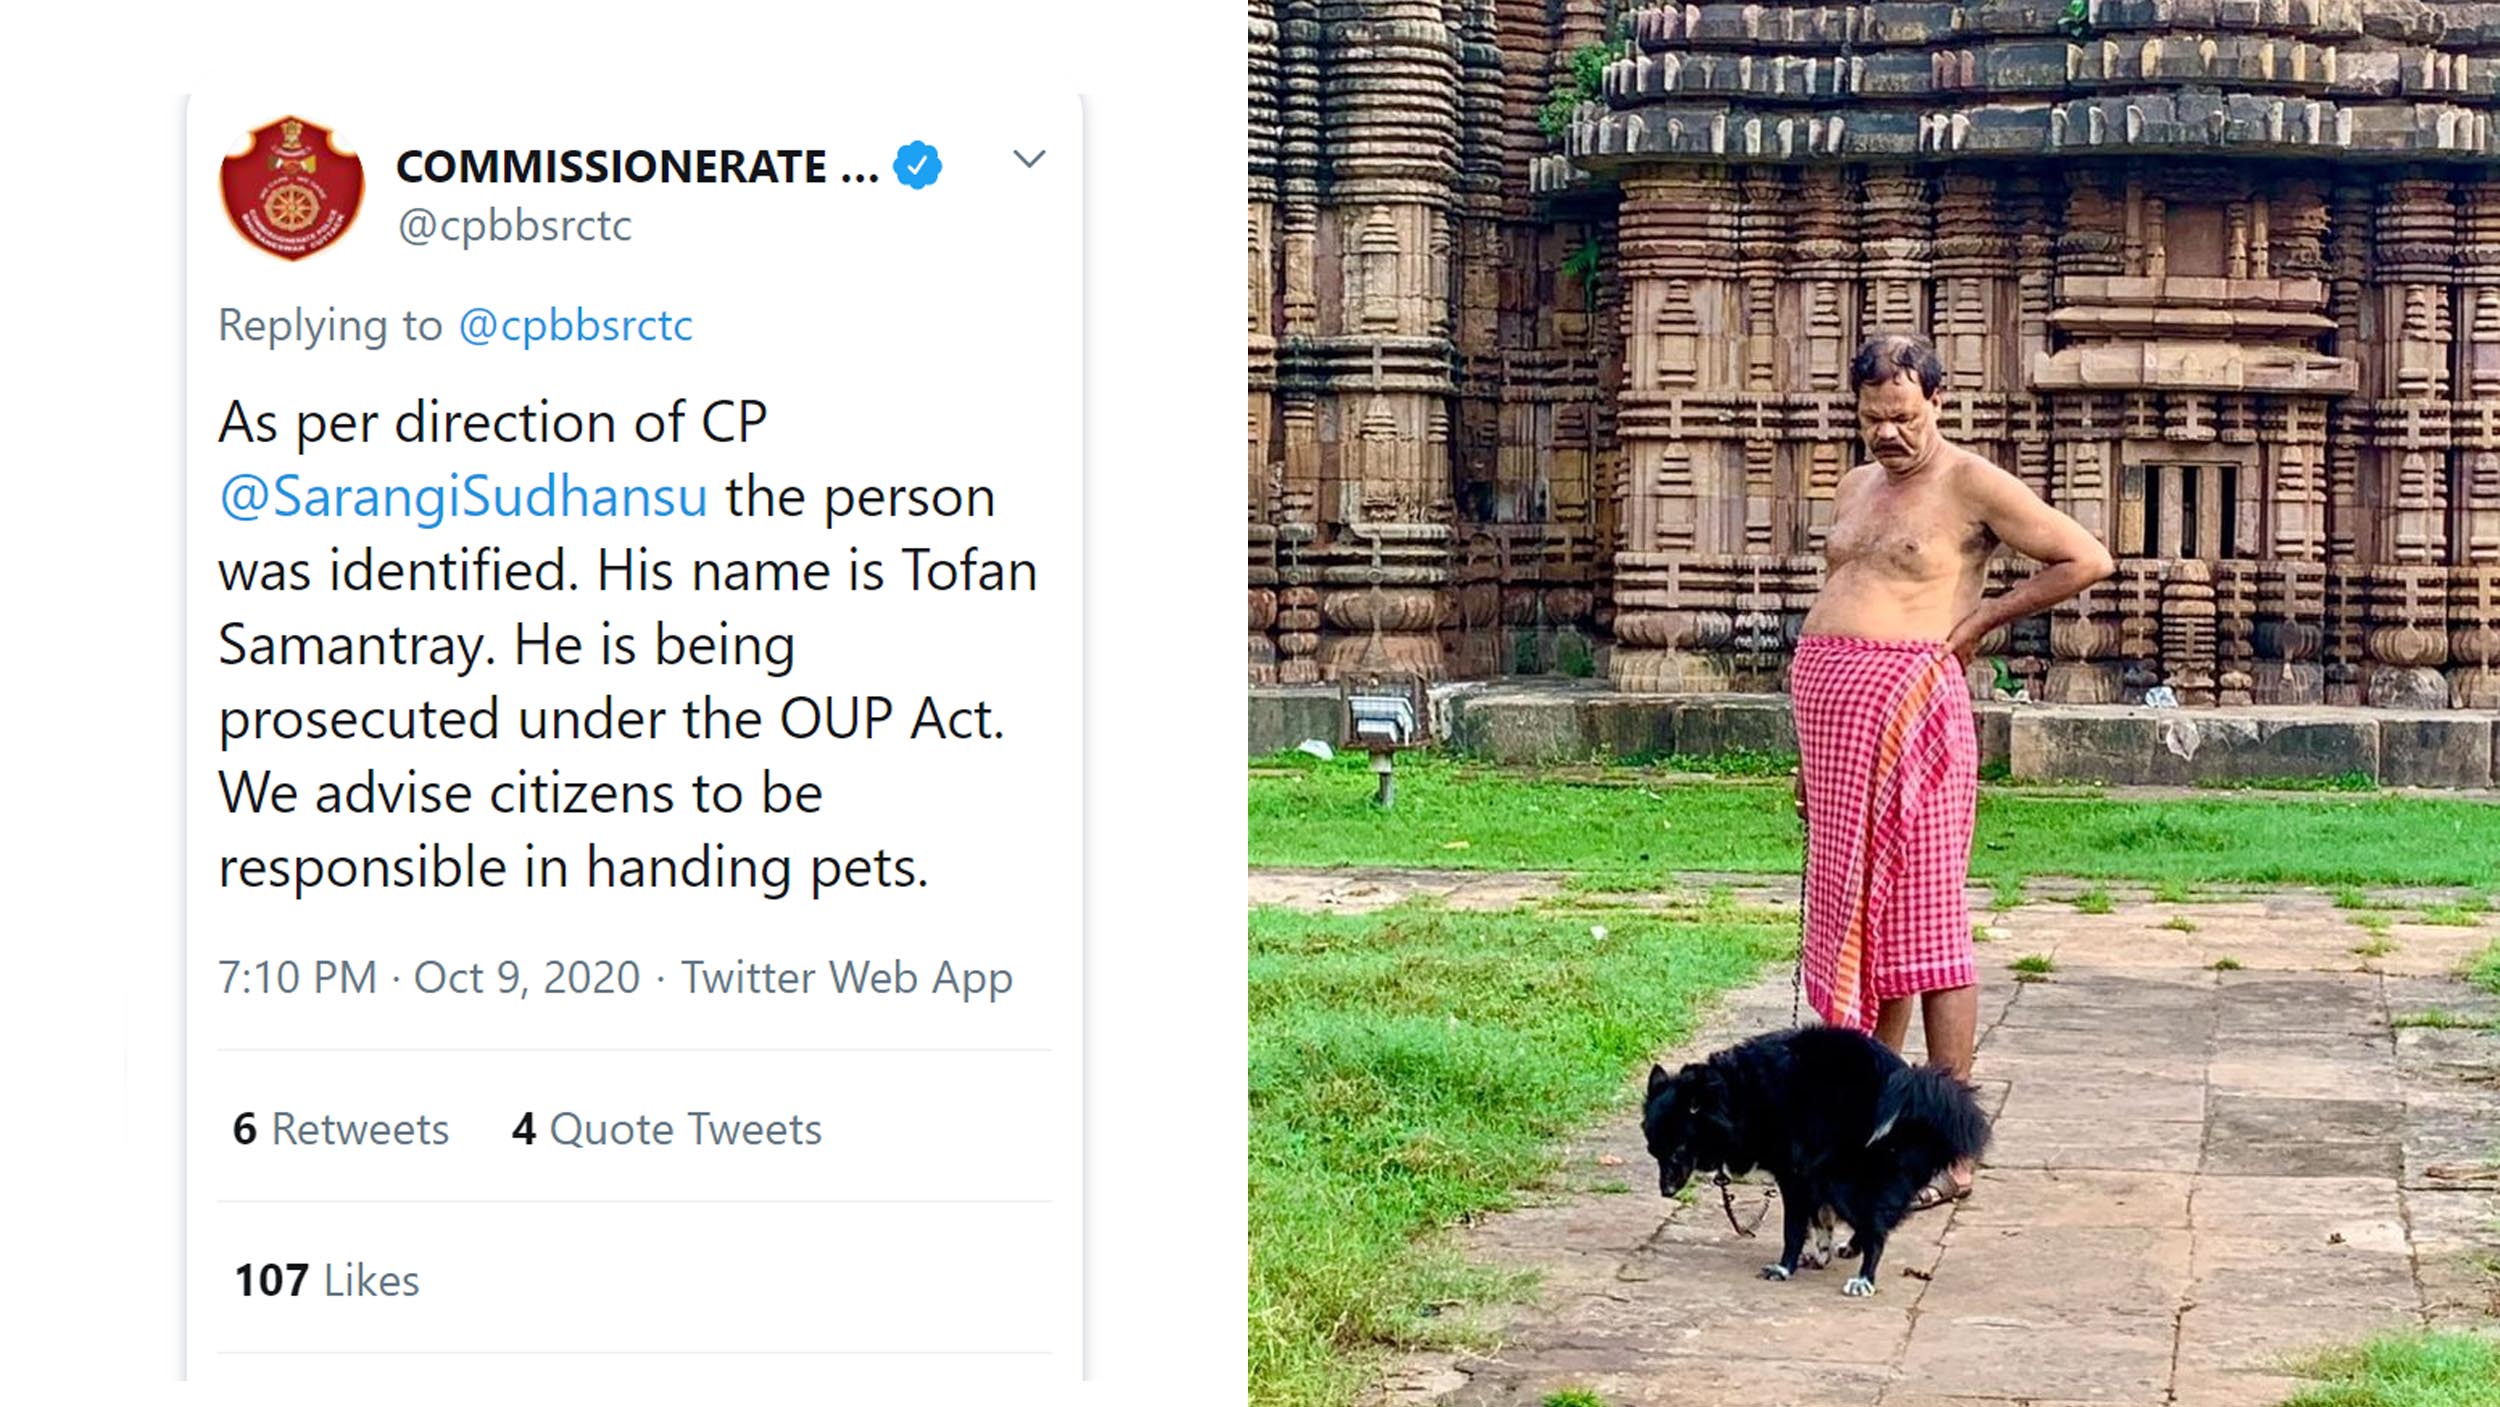 police action against resident defecating dog in monument in Bhubaneswar